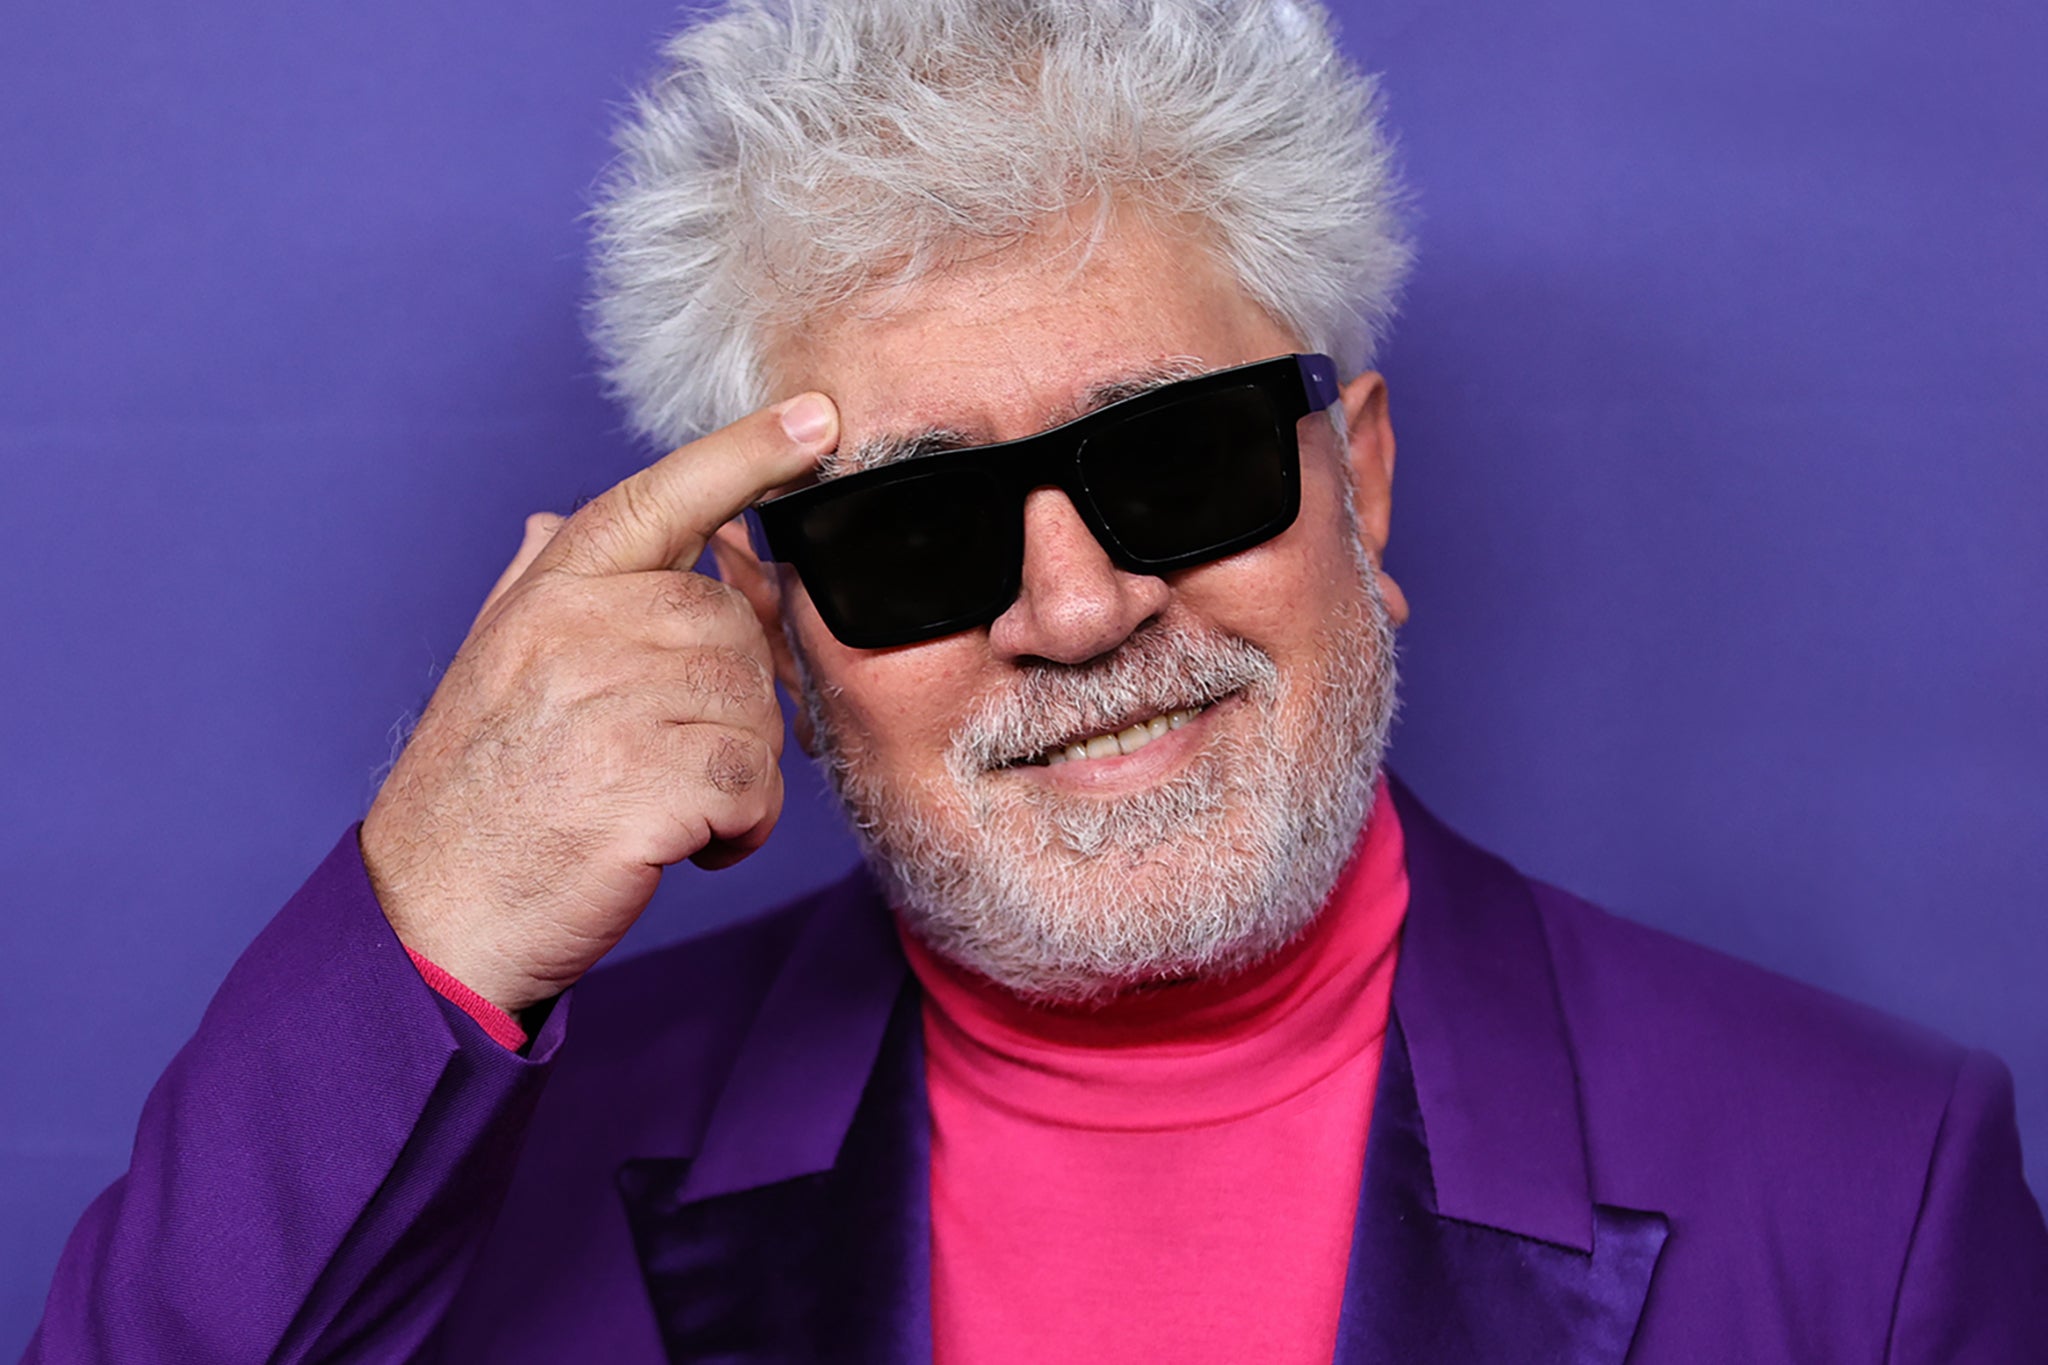 Pedro Almodovar wanted to do a different kind of sexy picture